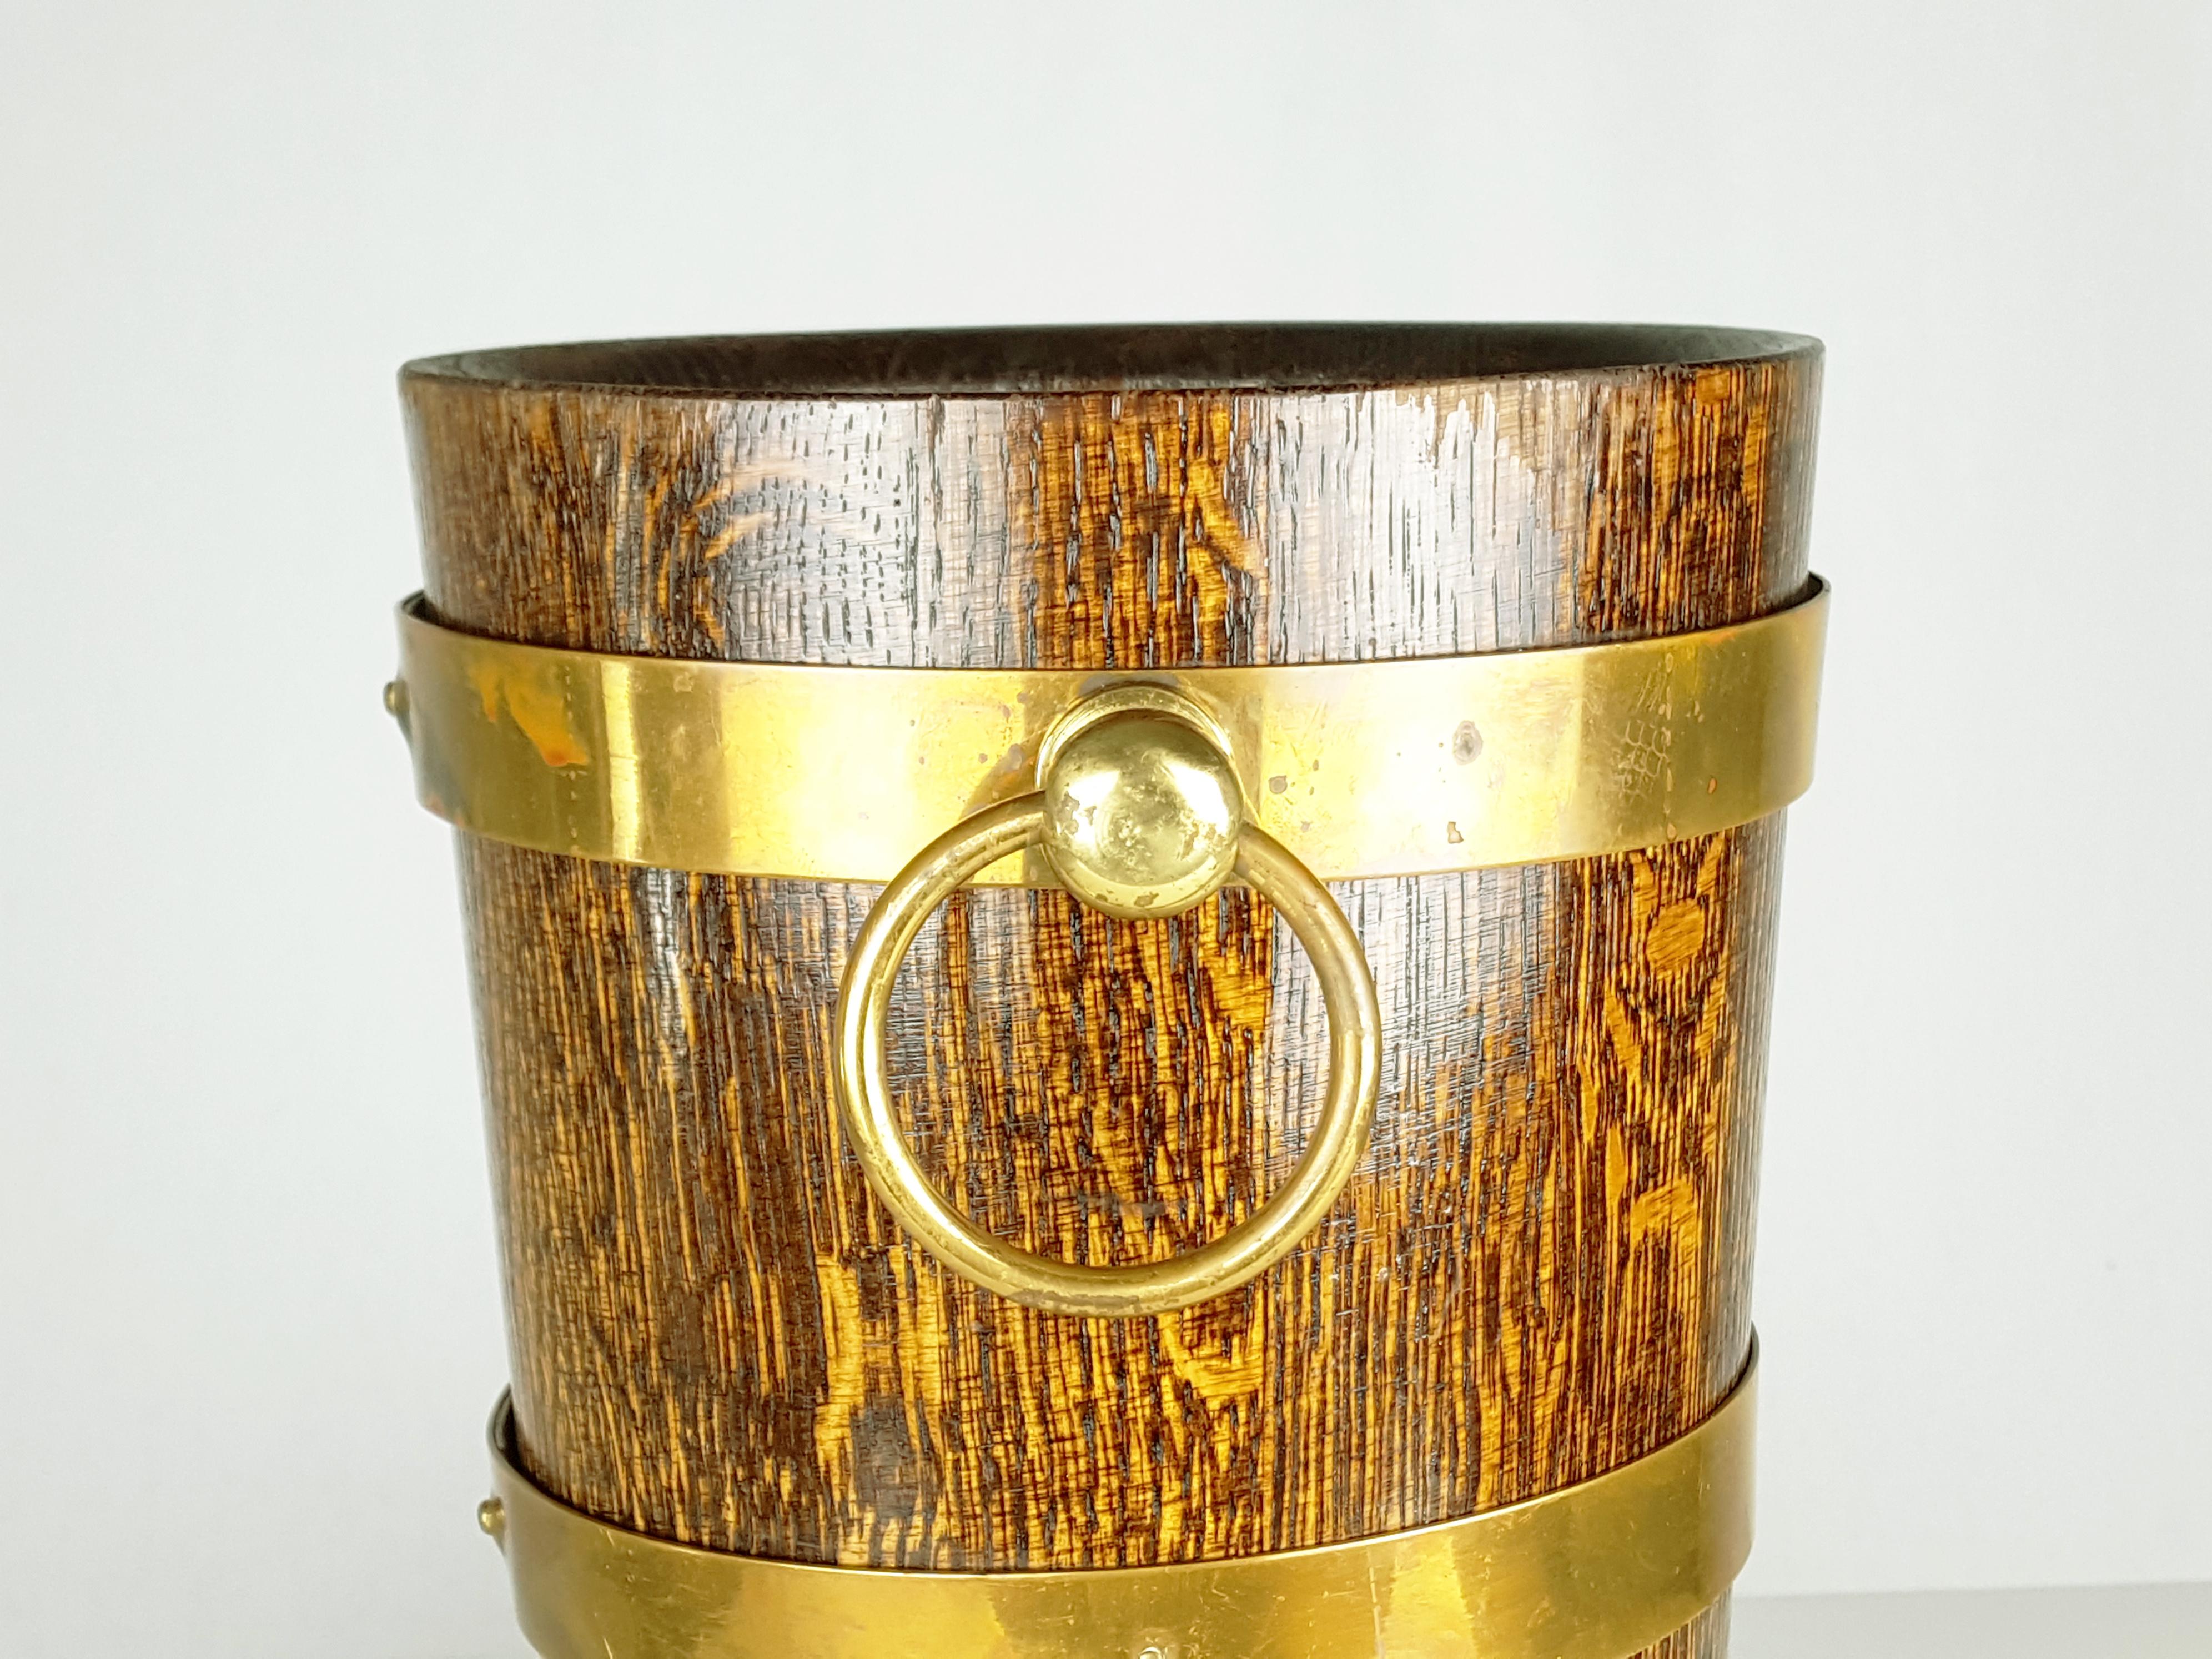 Oak and brass ice bucket with internal aluminum tray by Geraud Lafitte Ouvrier, 1950s.
Good condition. No breakages or visible damages.